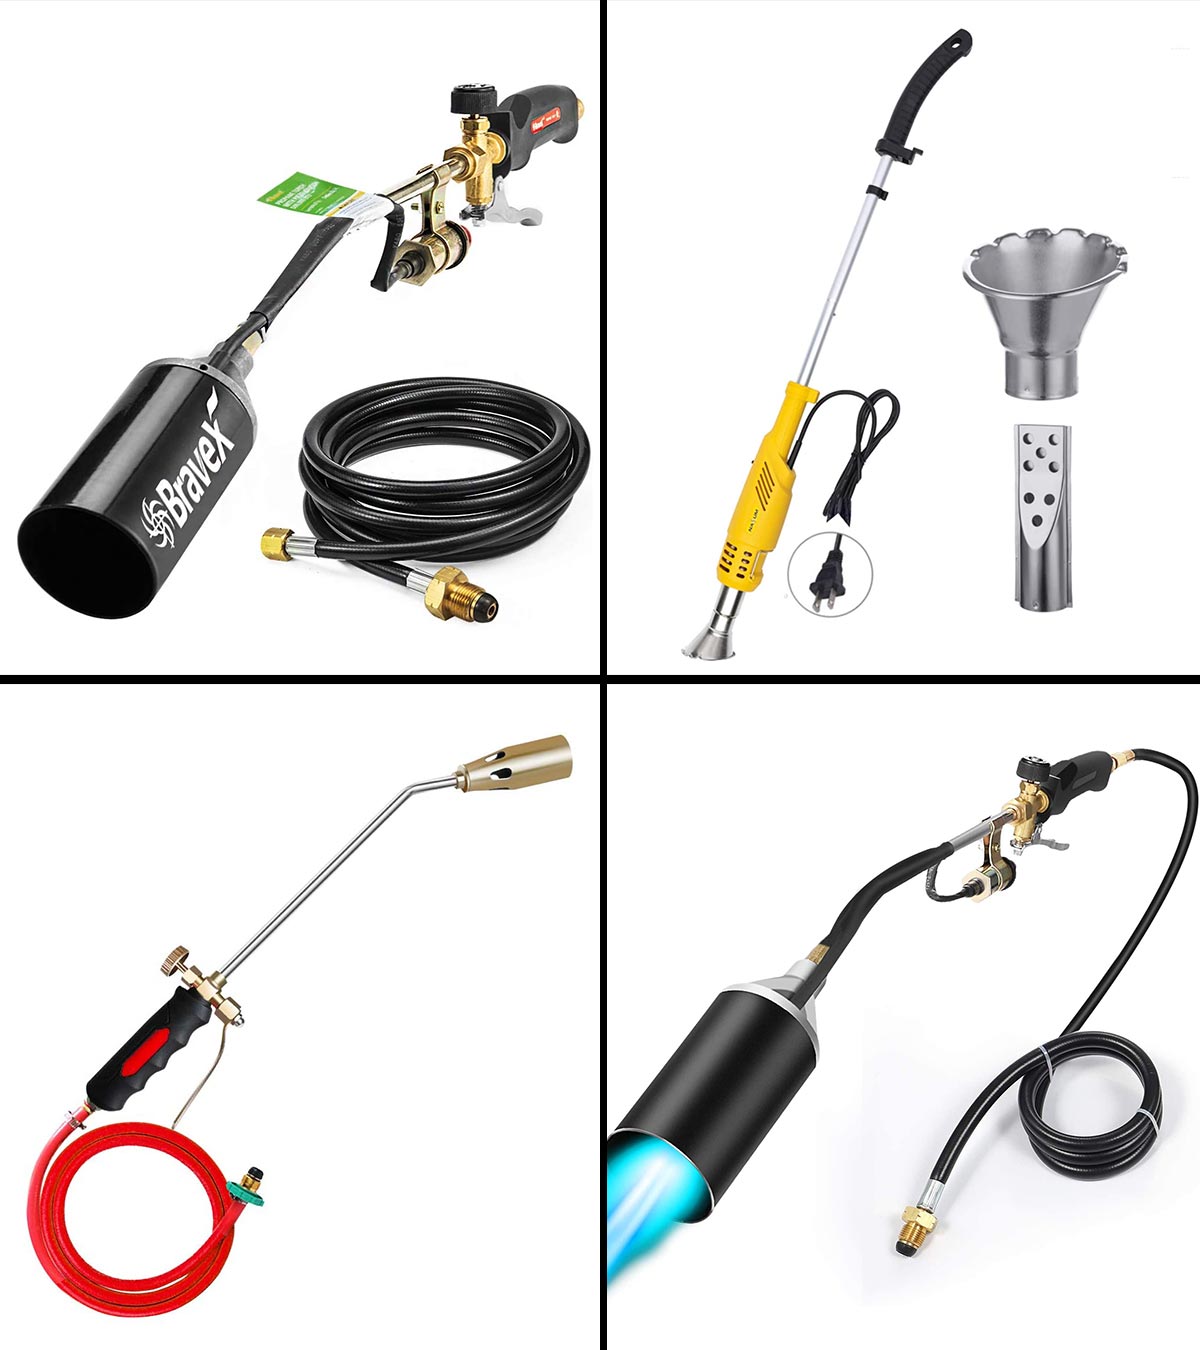 Propane Weed Torch Burner Melting Ice Snow Multifunctional Tool for Lawn & Garden Propane Torch and 10 ft Long Hose Piezo Electric Ignition Comes with Turbo Trigger Push Button Igniter 